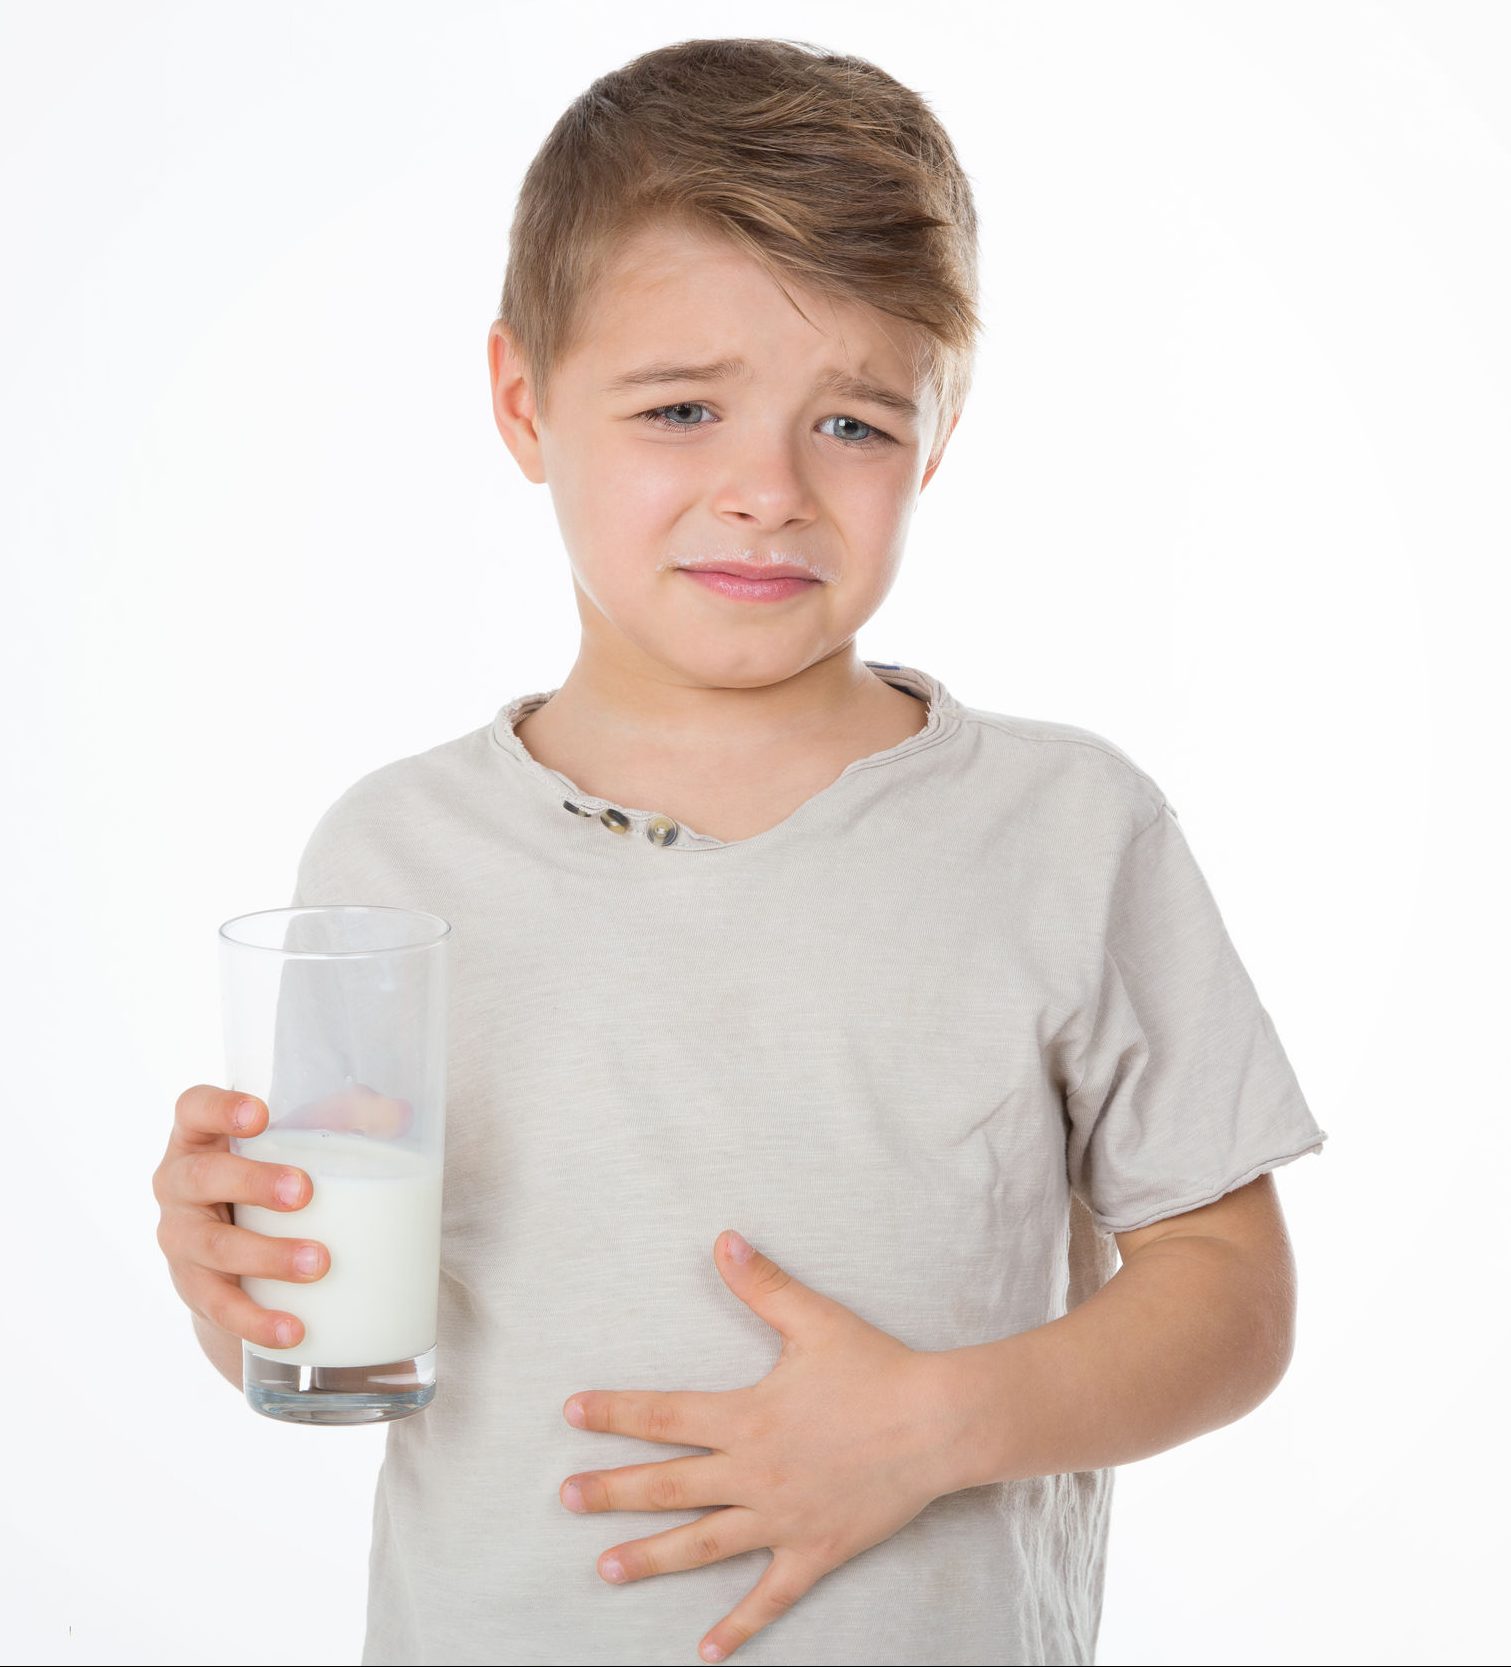 33405931 - child with painful expression after drinking milk